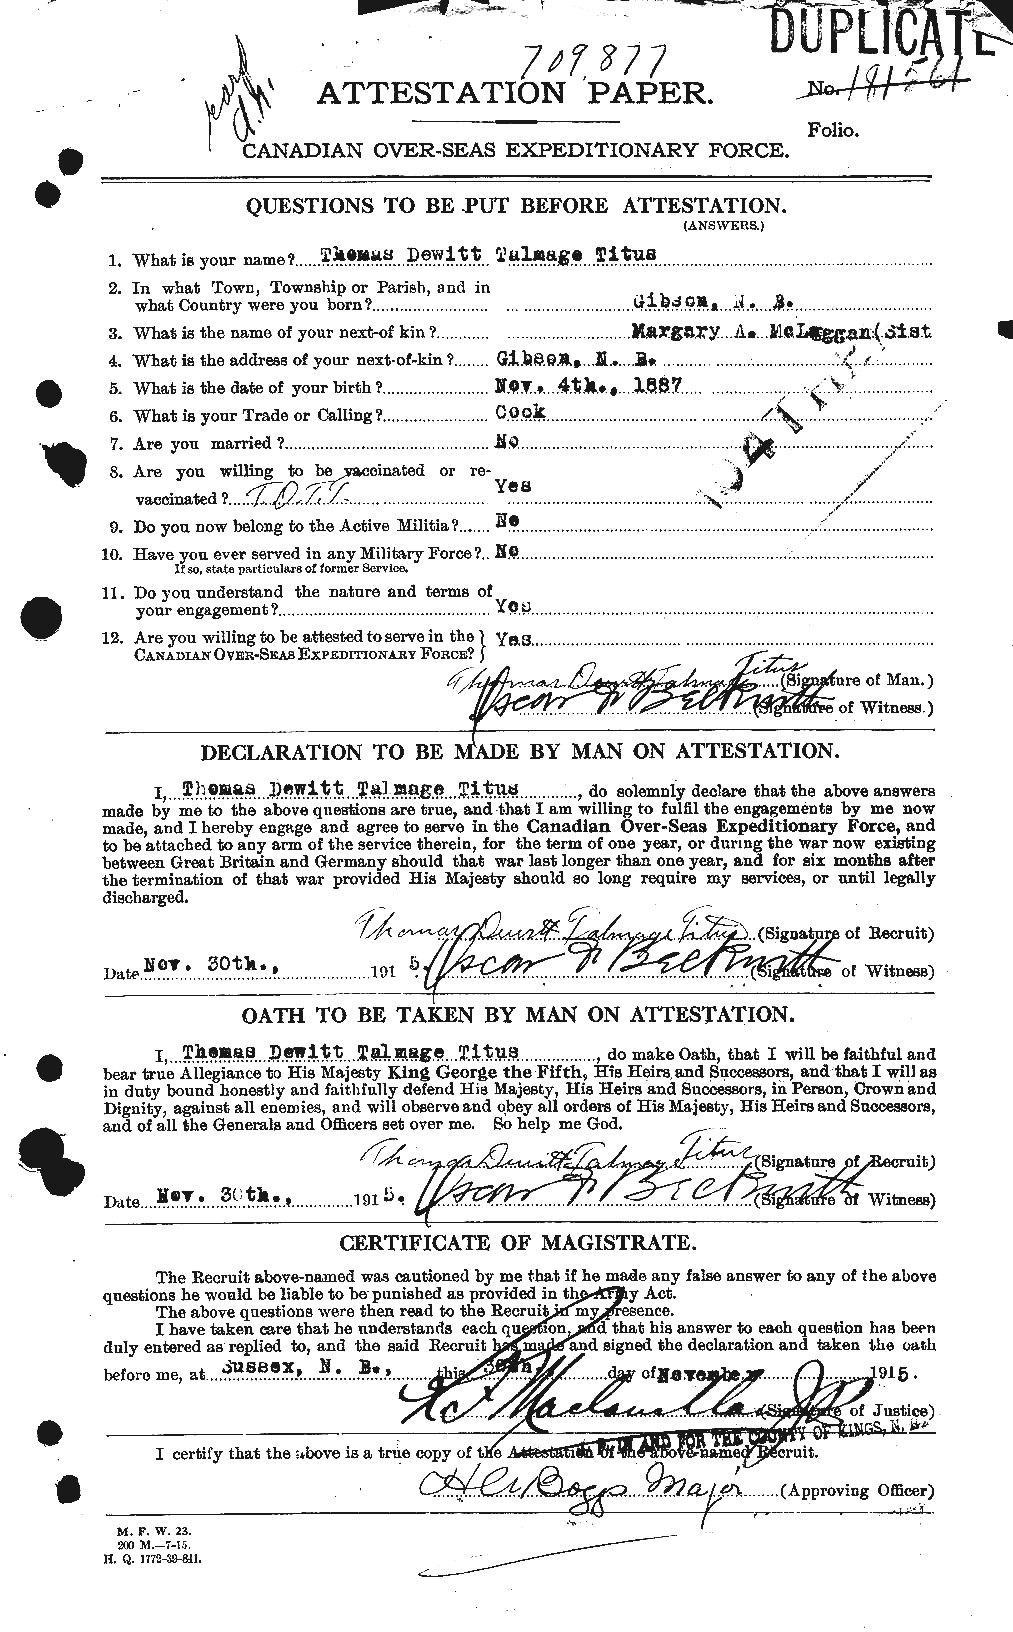 Personnel Records of the First World War - CEF 634987a